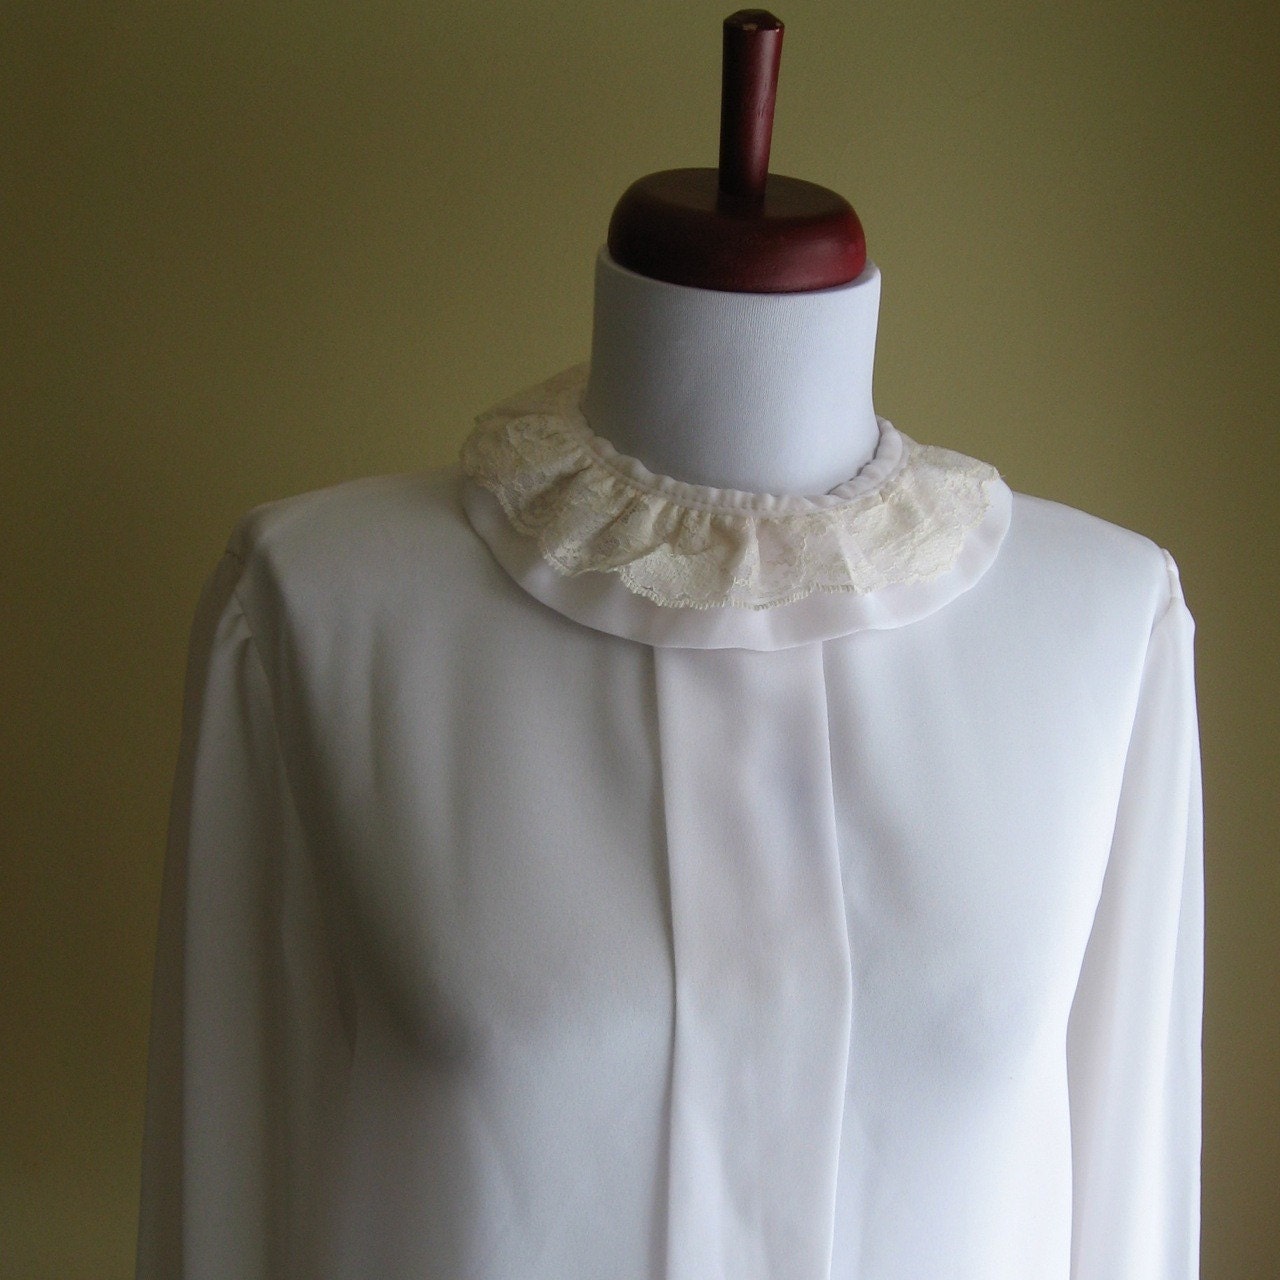 The White Victorian Ruffle Collar Blouse by simplevintage on Etsy